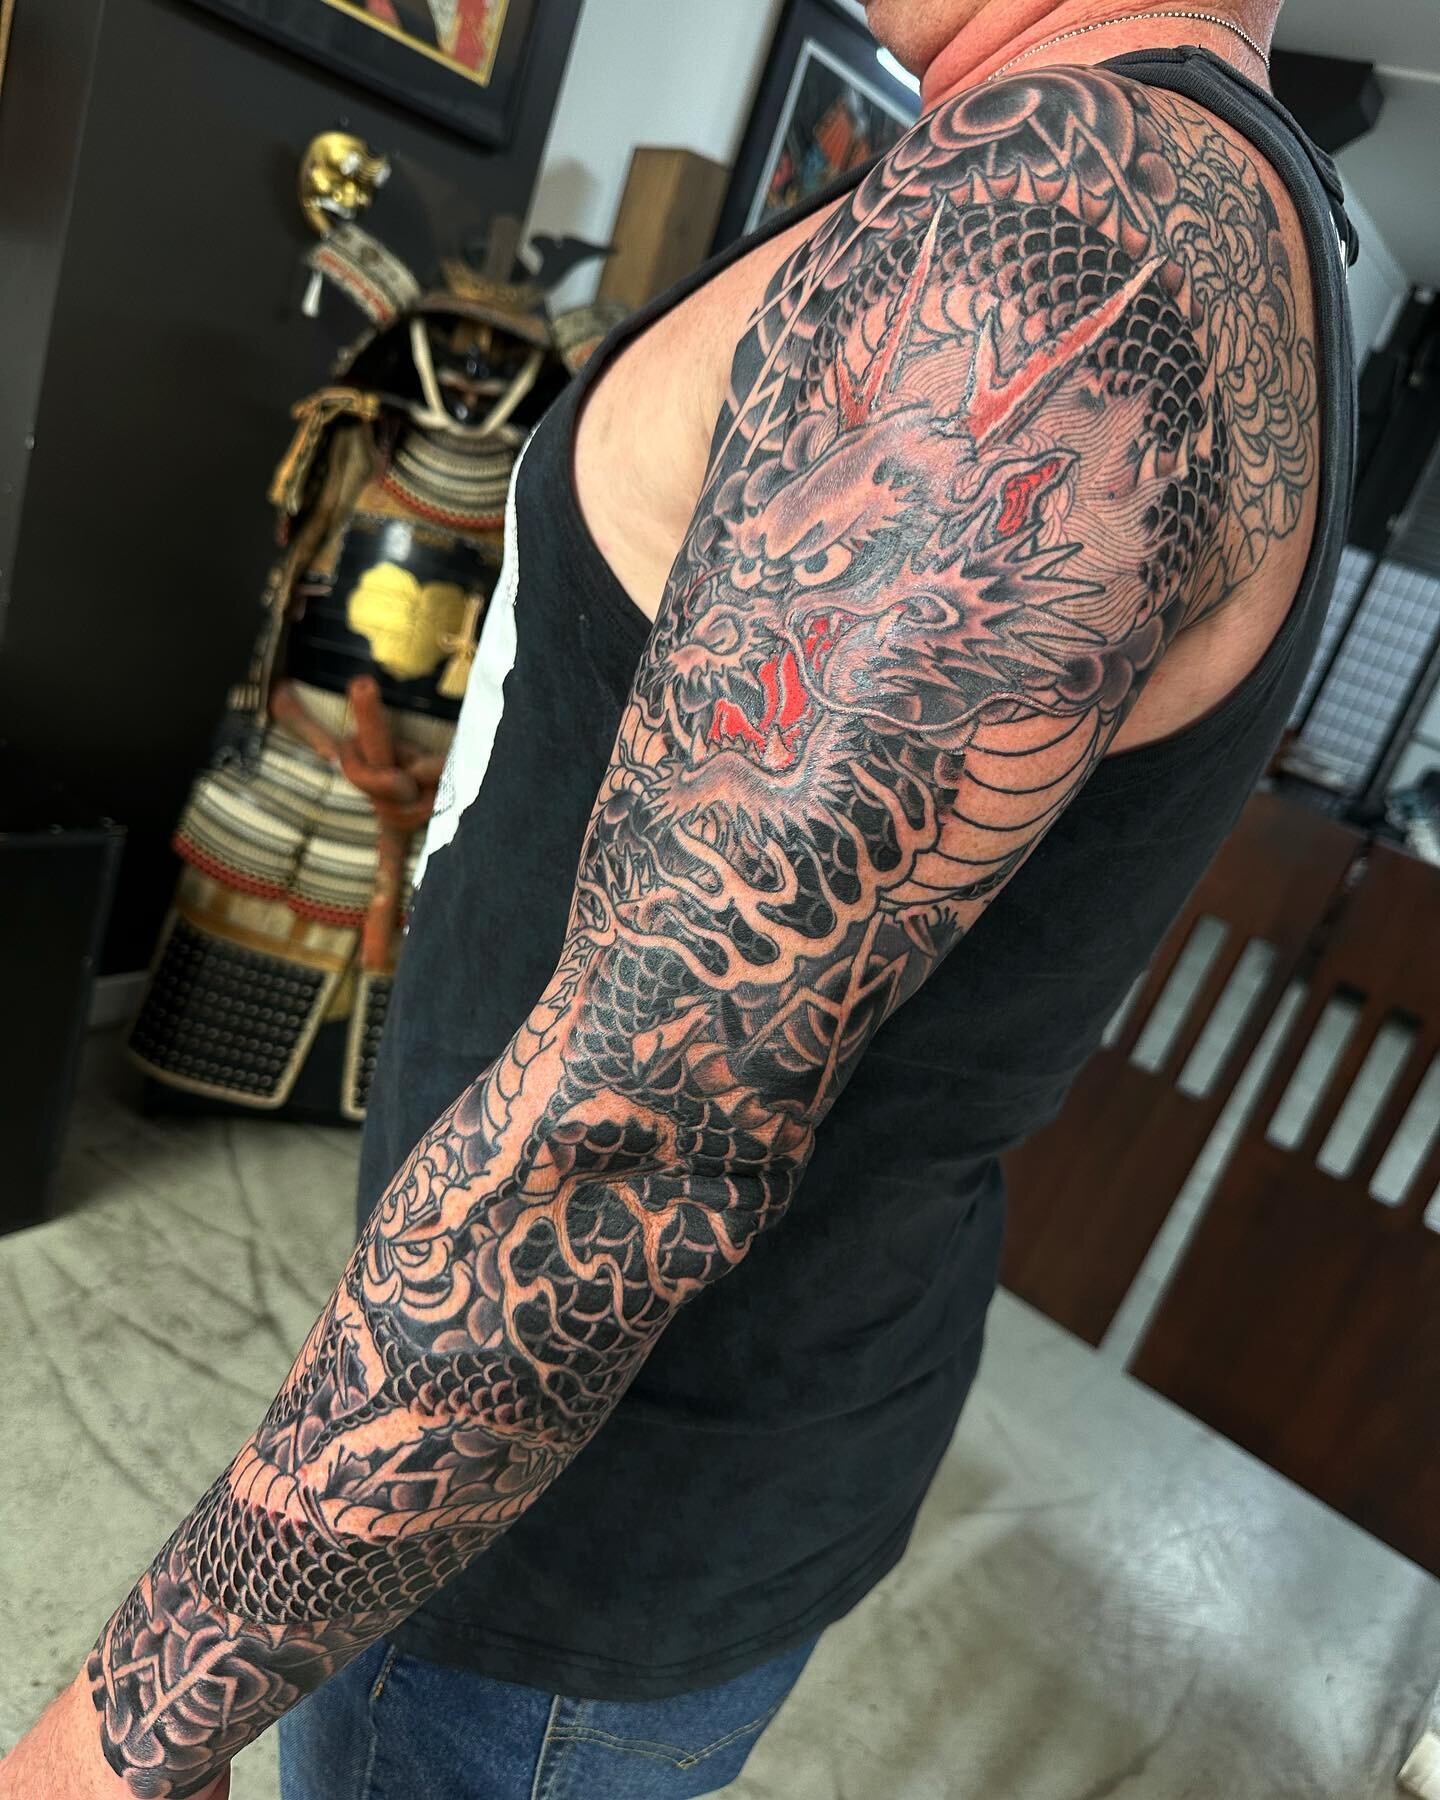 Great to get stuck into the foreground of Paul&rsquo;s sleeve the other day @lighthouse_tattoo thanks mate! Super shiny photo as there&rsquo;s still some healing going on.. 

#getabodysuit
Books always open. 
Hit the website link to make an enquiry.
